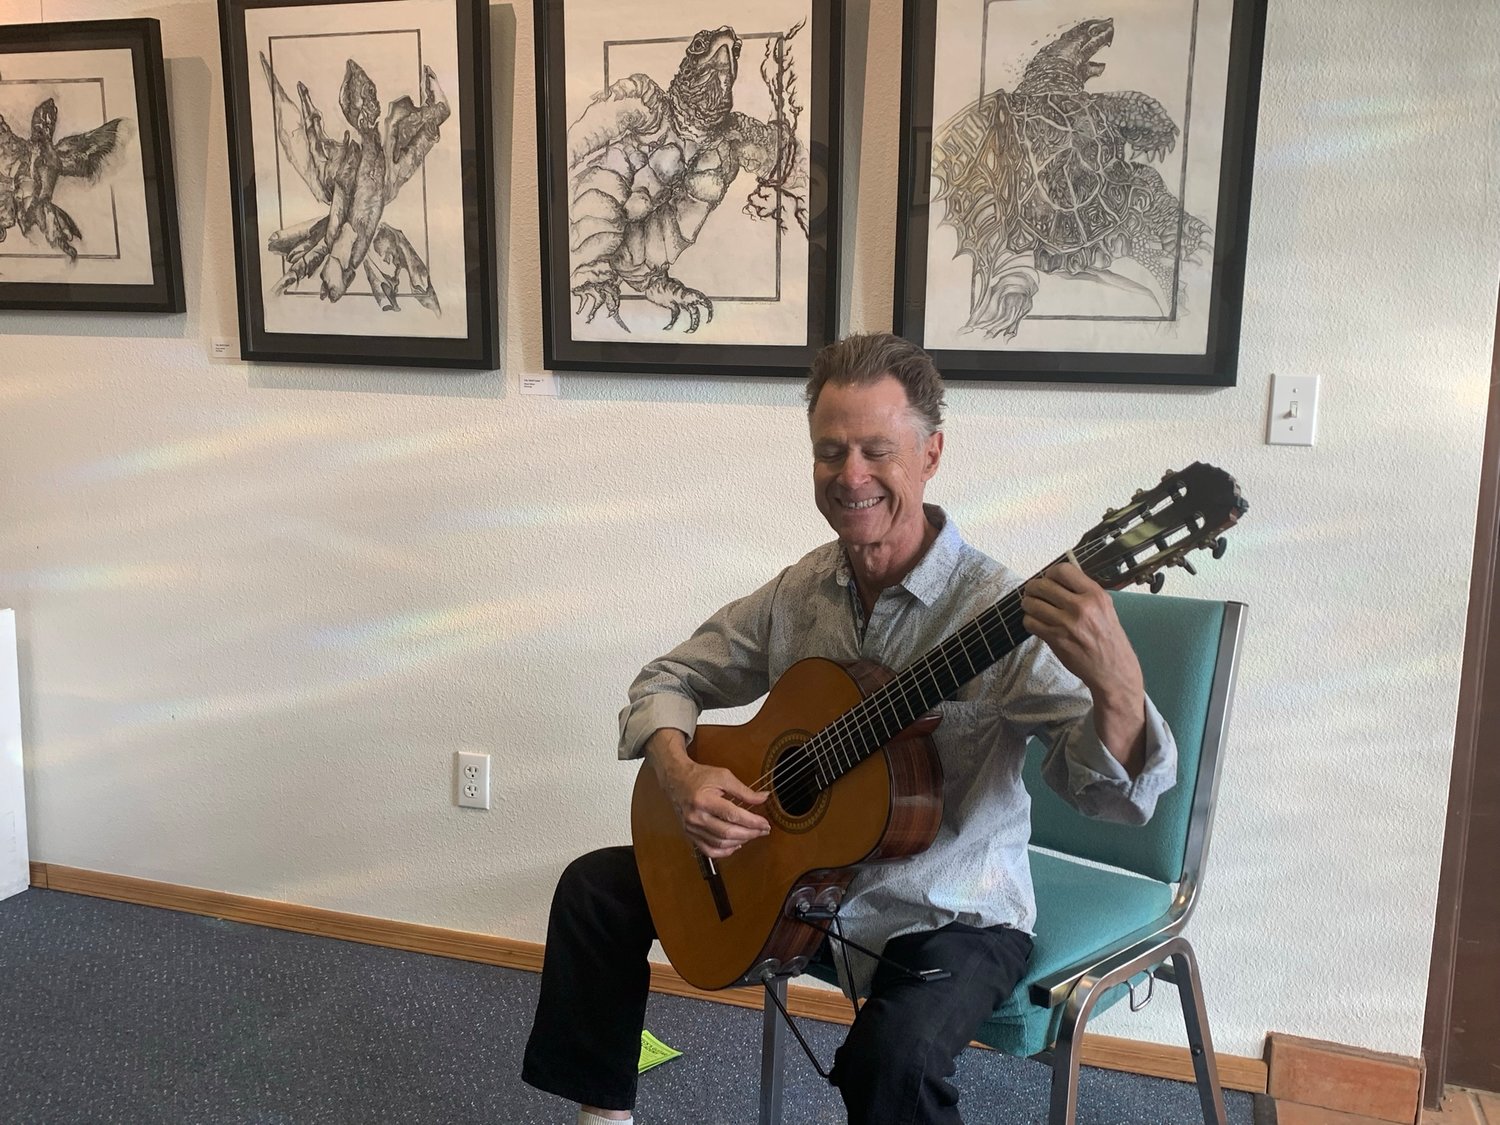 Hunter Beck plays his classical guitar for an art opening at the Tombaugh Gallery in May.